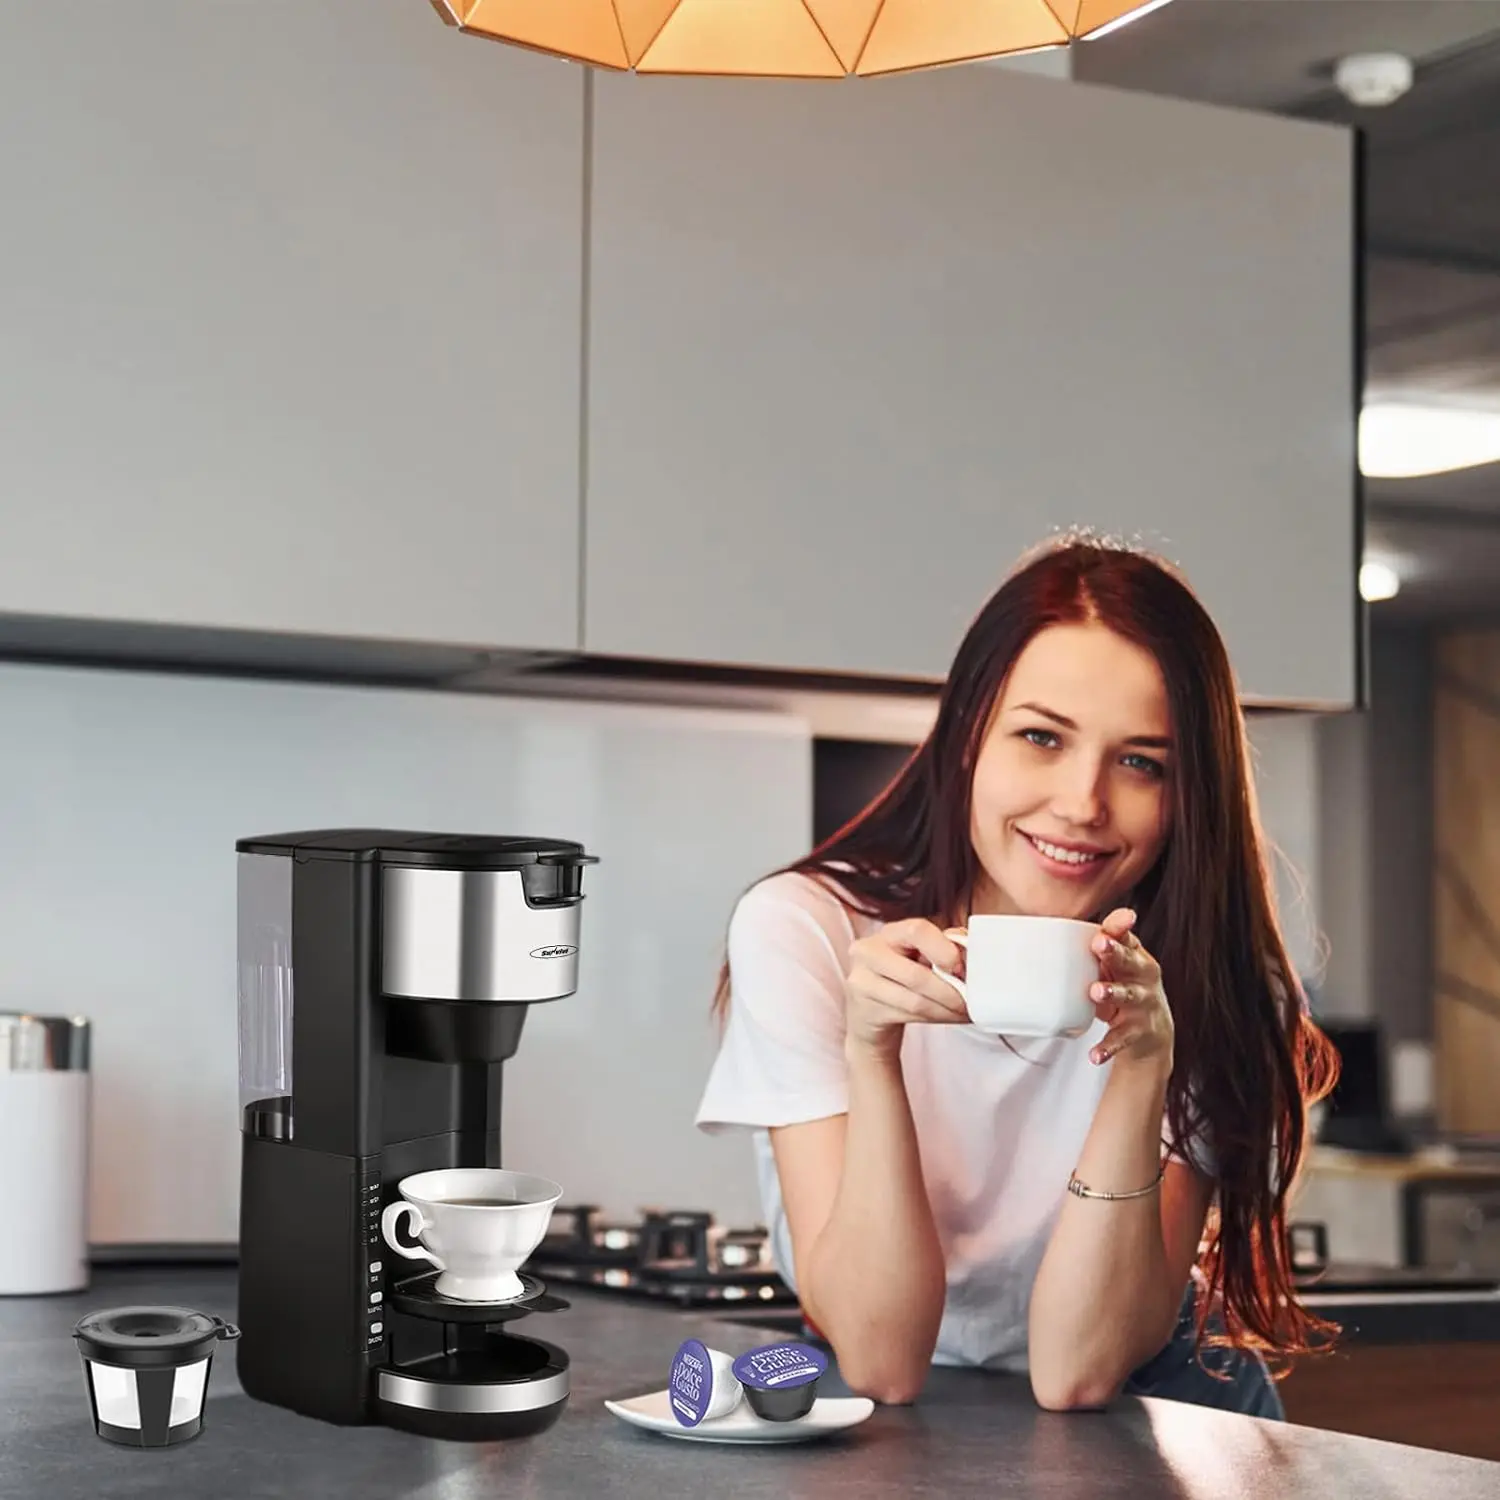 

in 1 Single Serve Coffee Maker , One Cup Coffee Maker for Capsule Pod Ground Coffee , 30oz Removable Reservoir One-Touch Button,